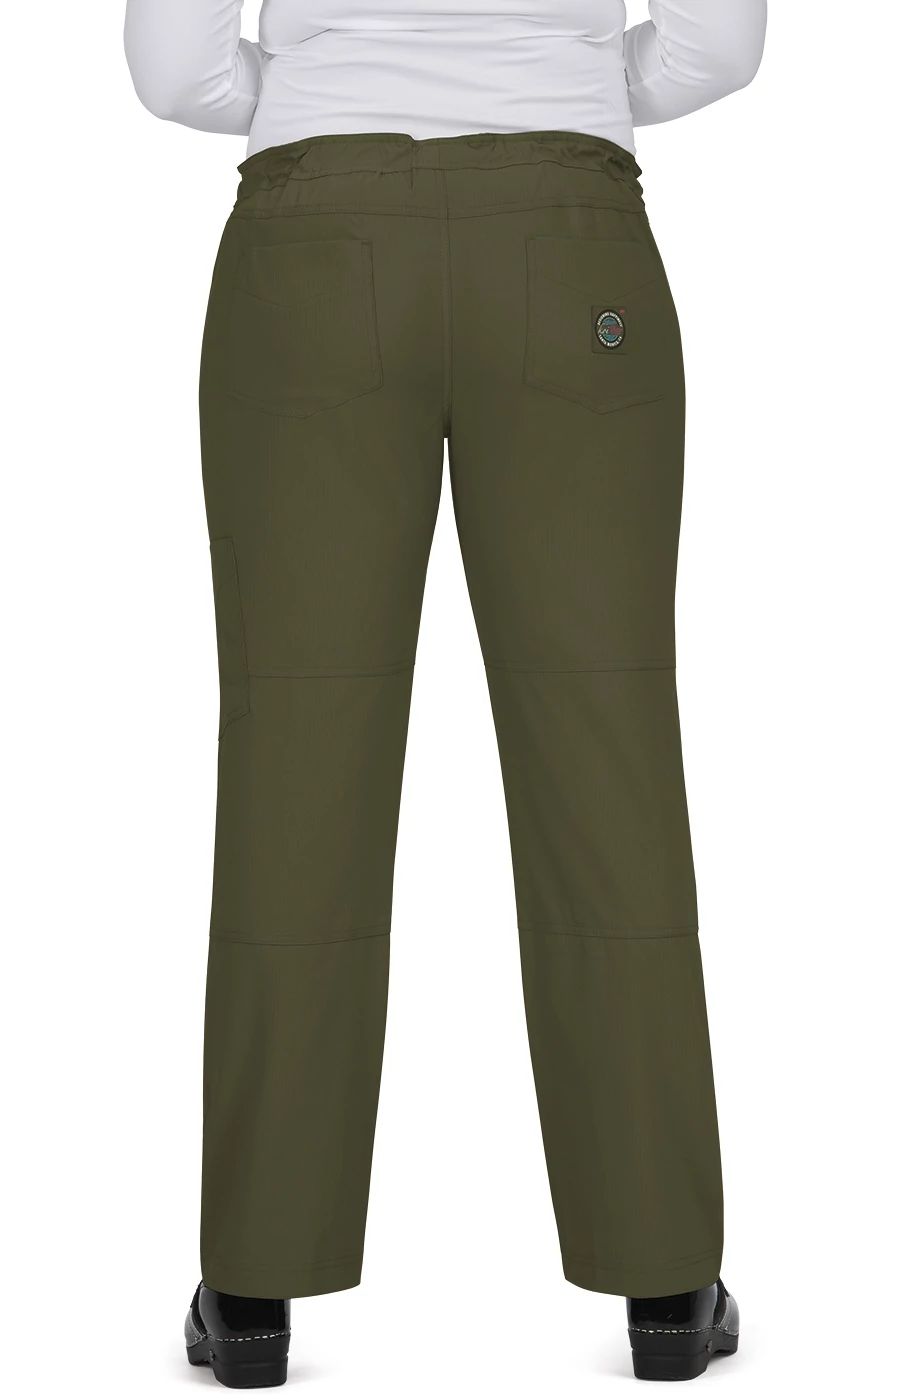 peace-pant-olive-green